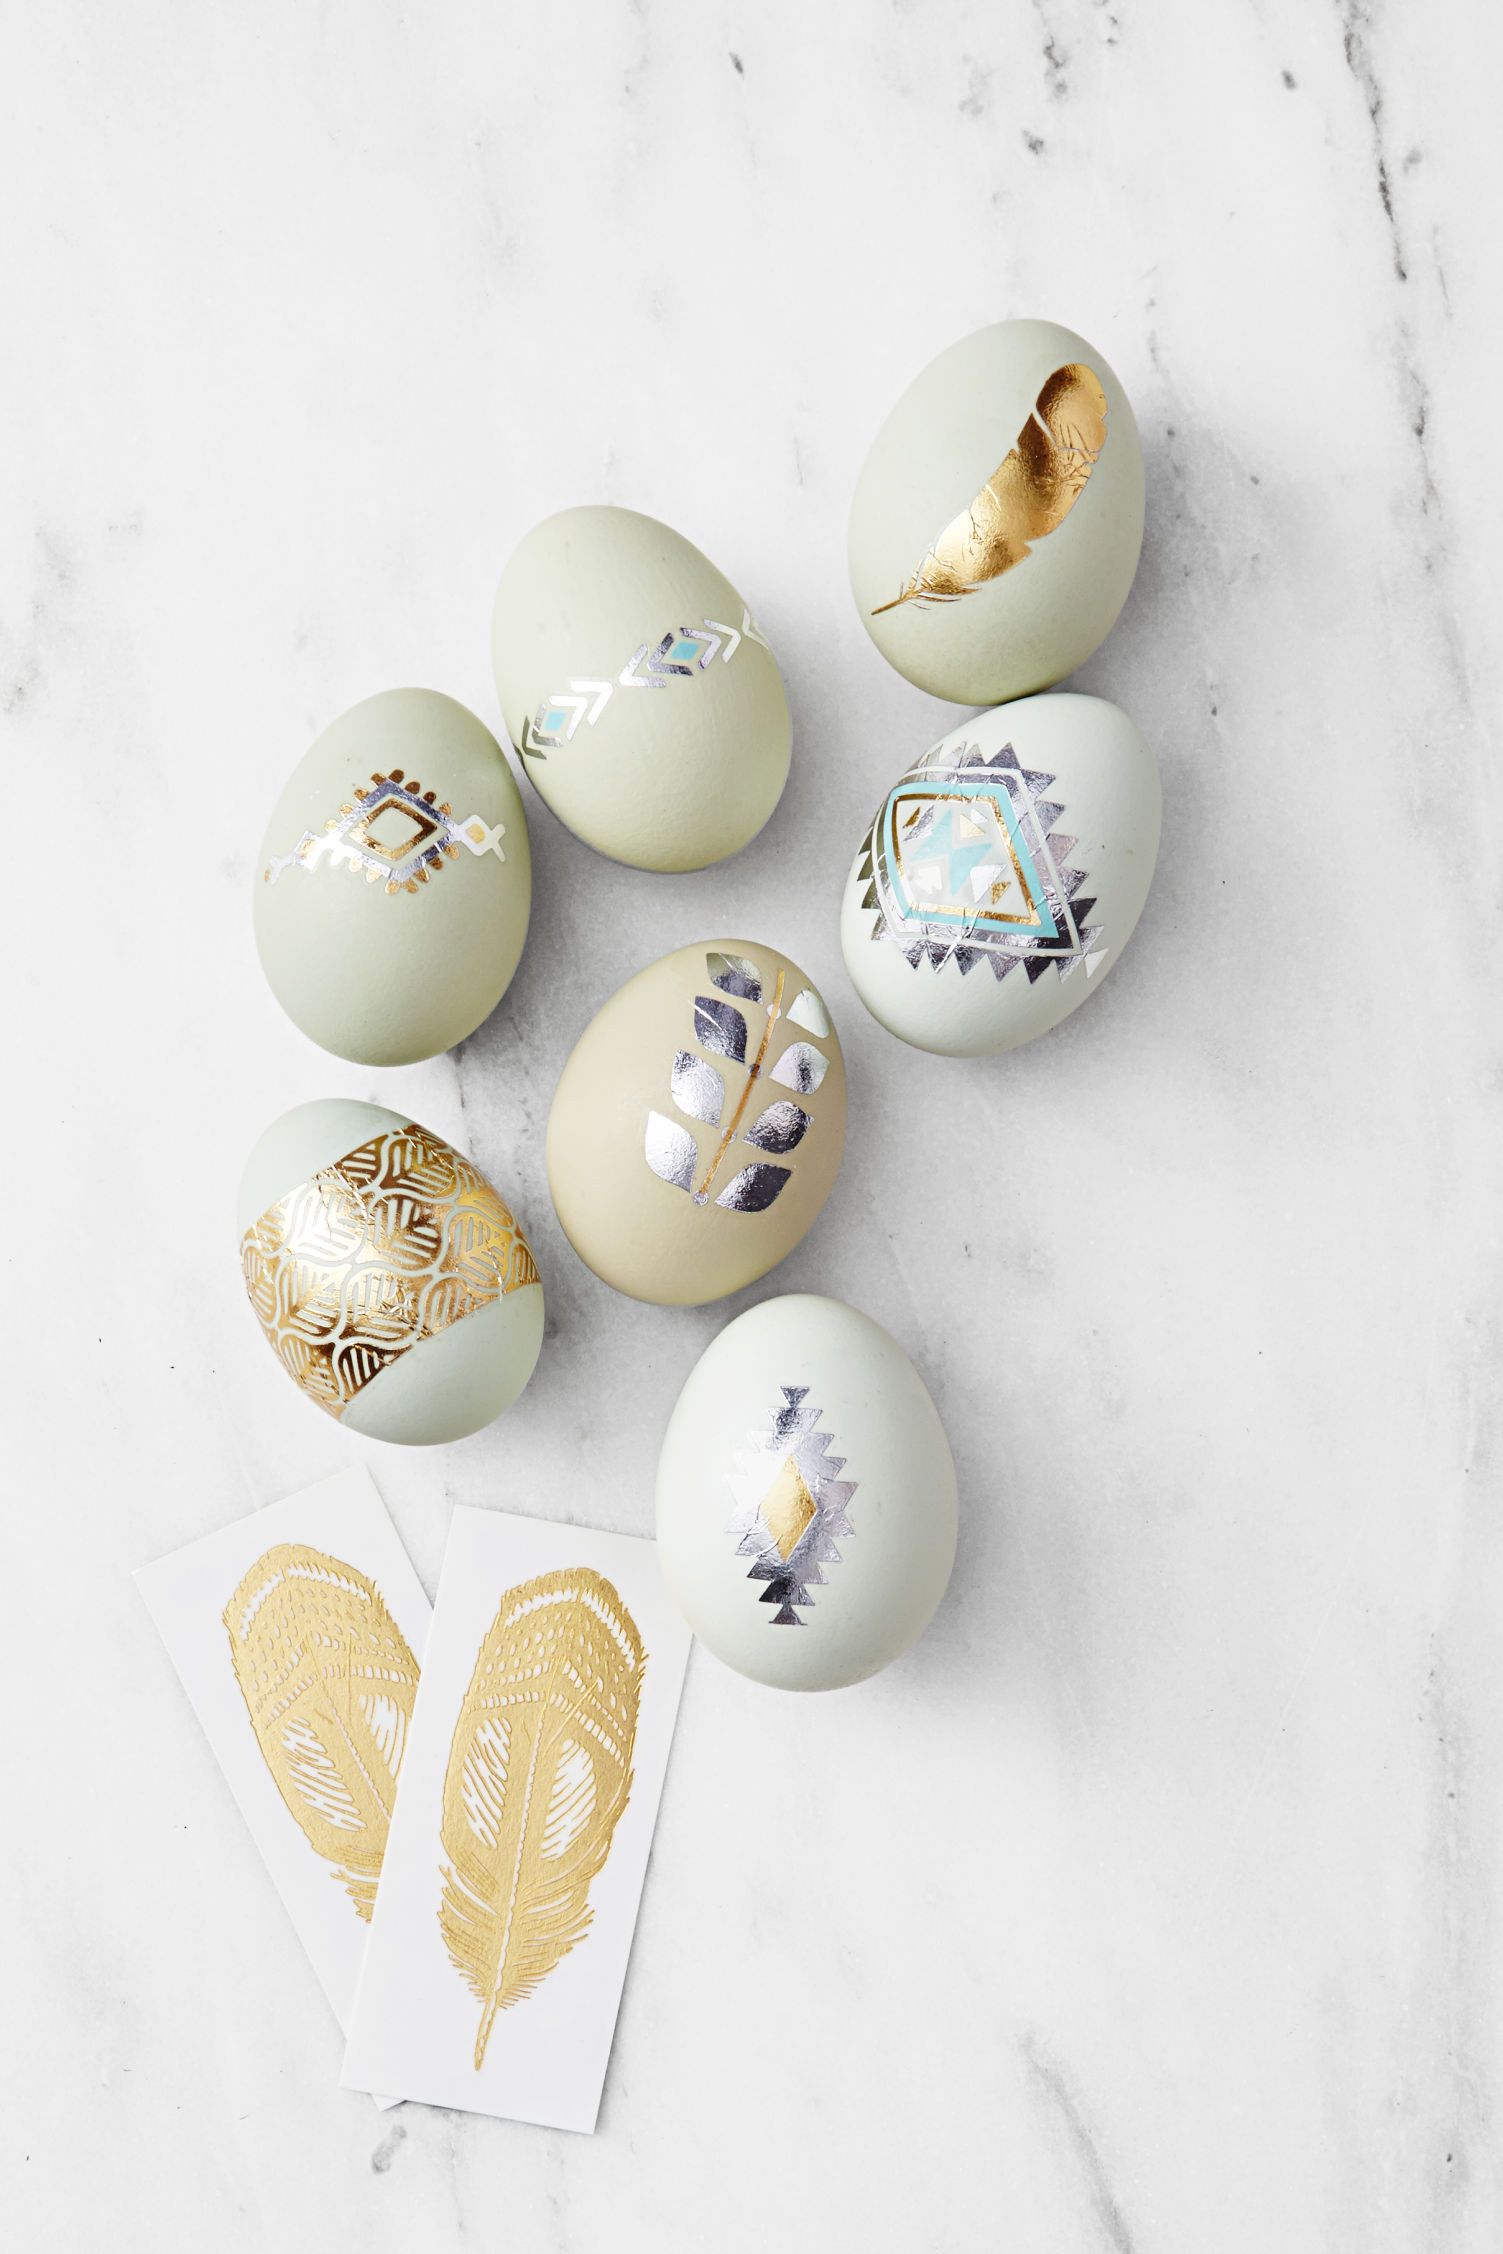 Tattoo Easter Eggs Are a Fun Holiday Craft  DIY Candy